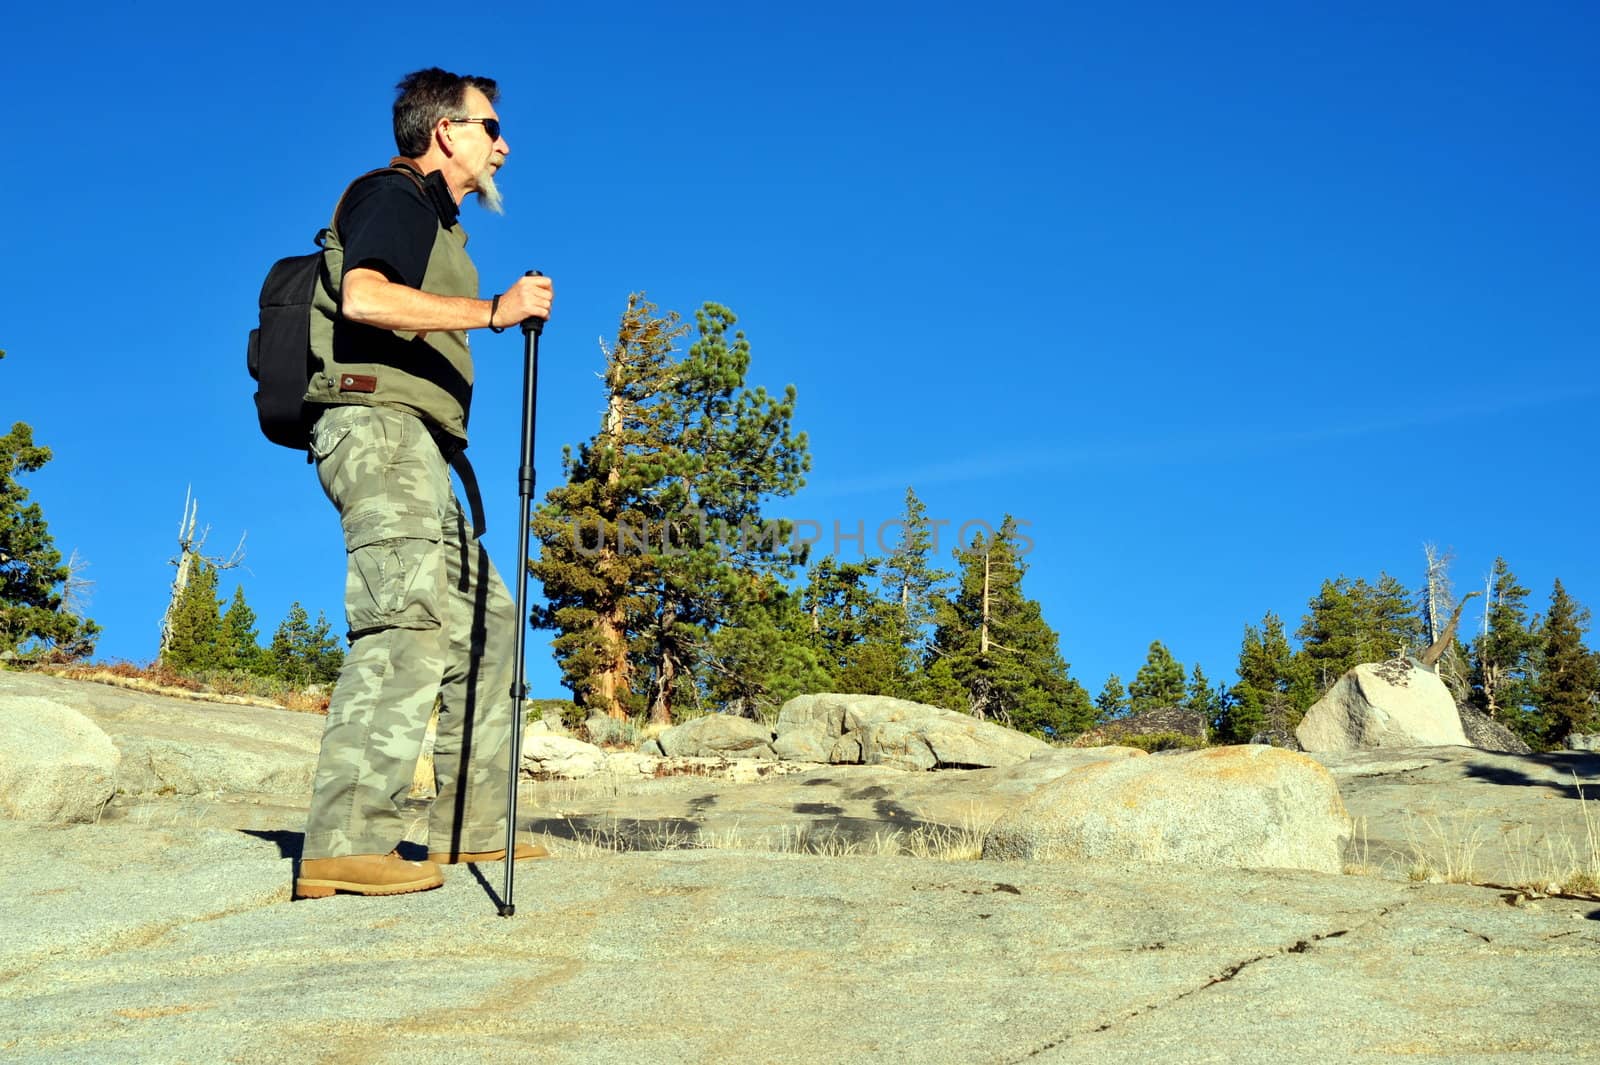 A single male day hiker reaches the summit of a granite mountain to